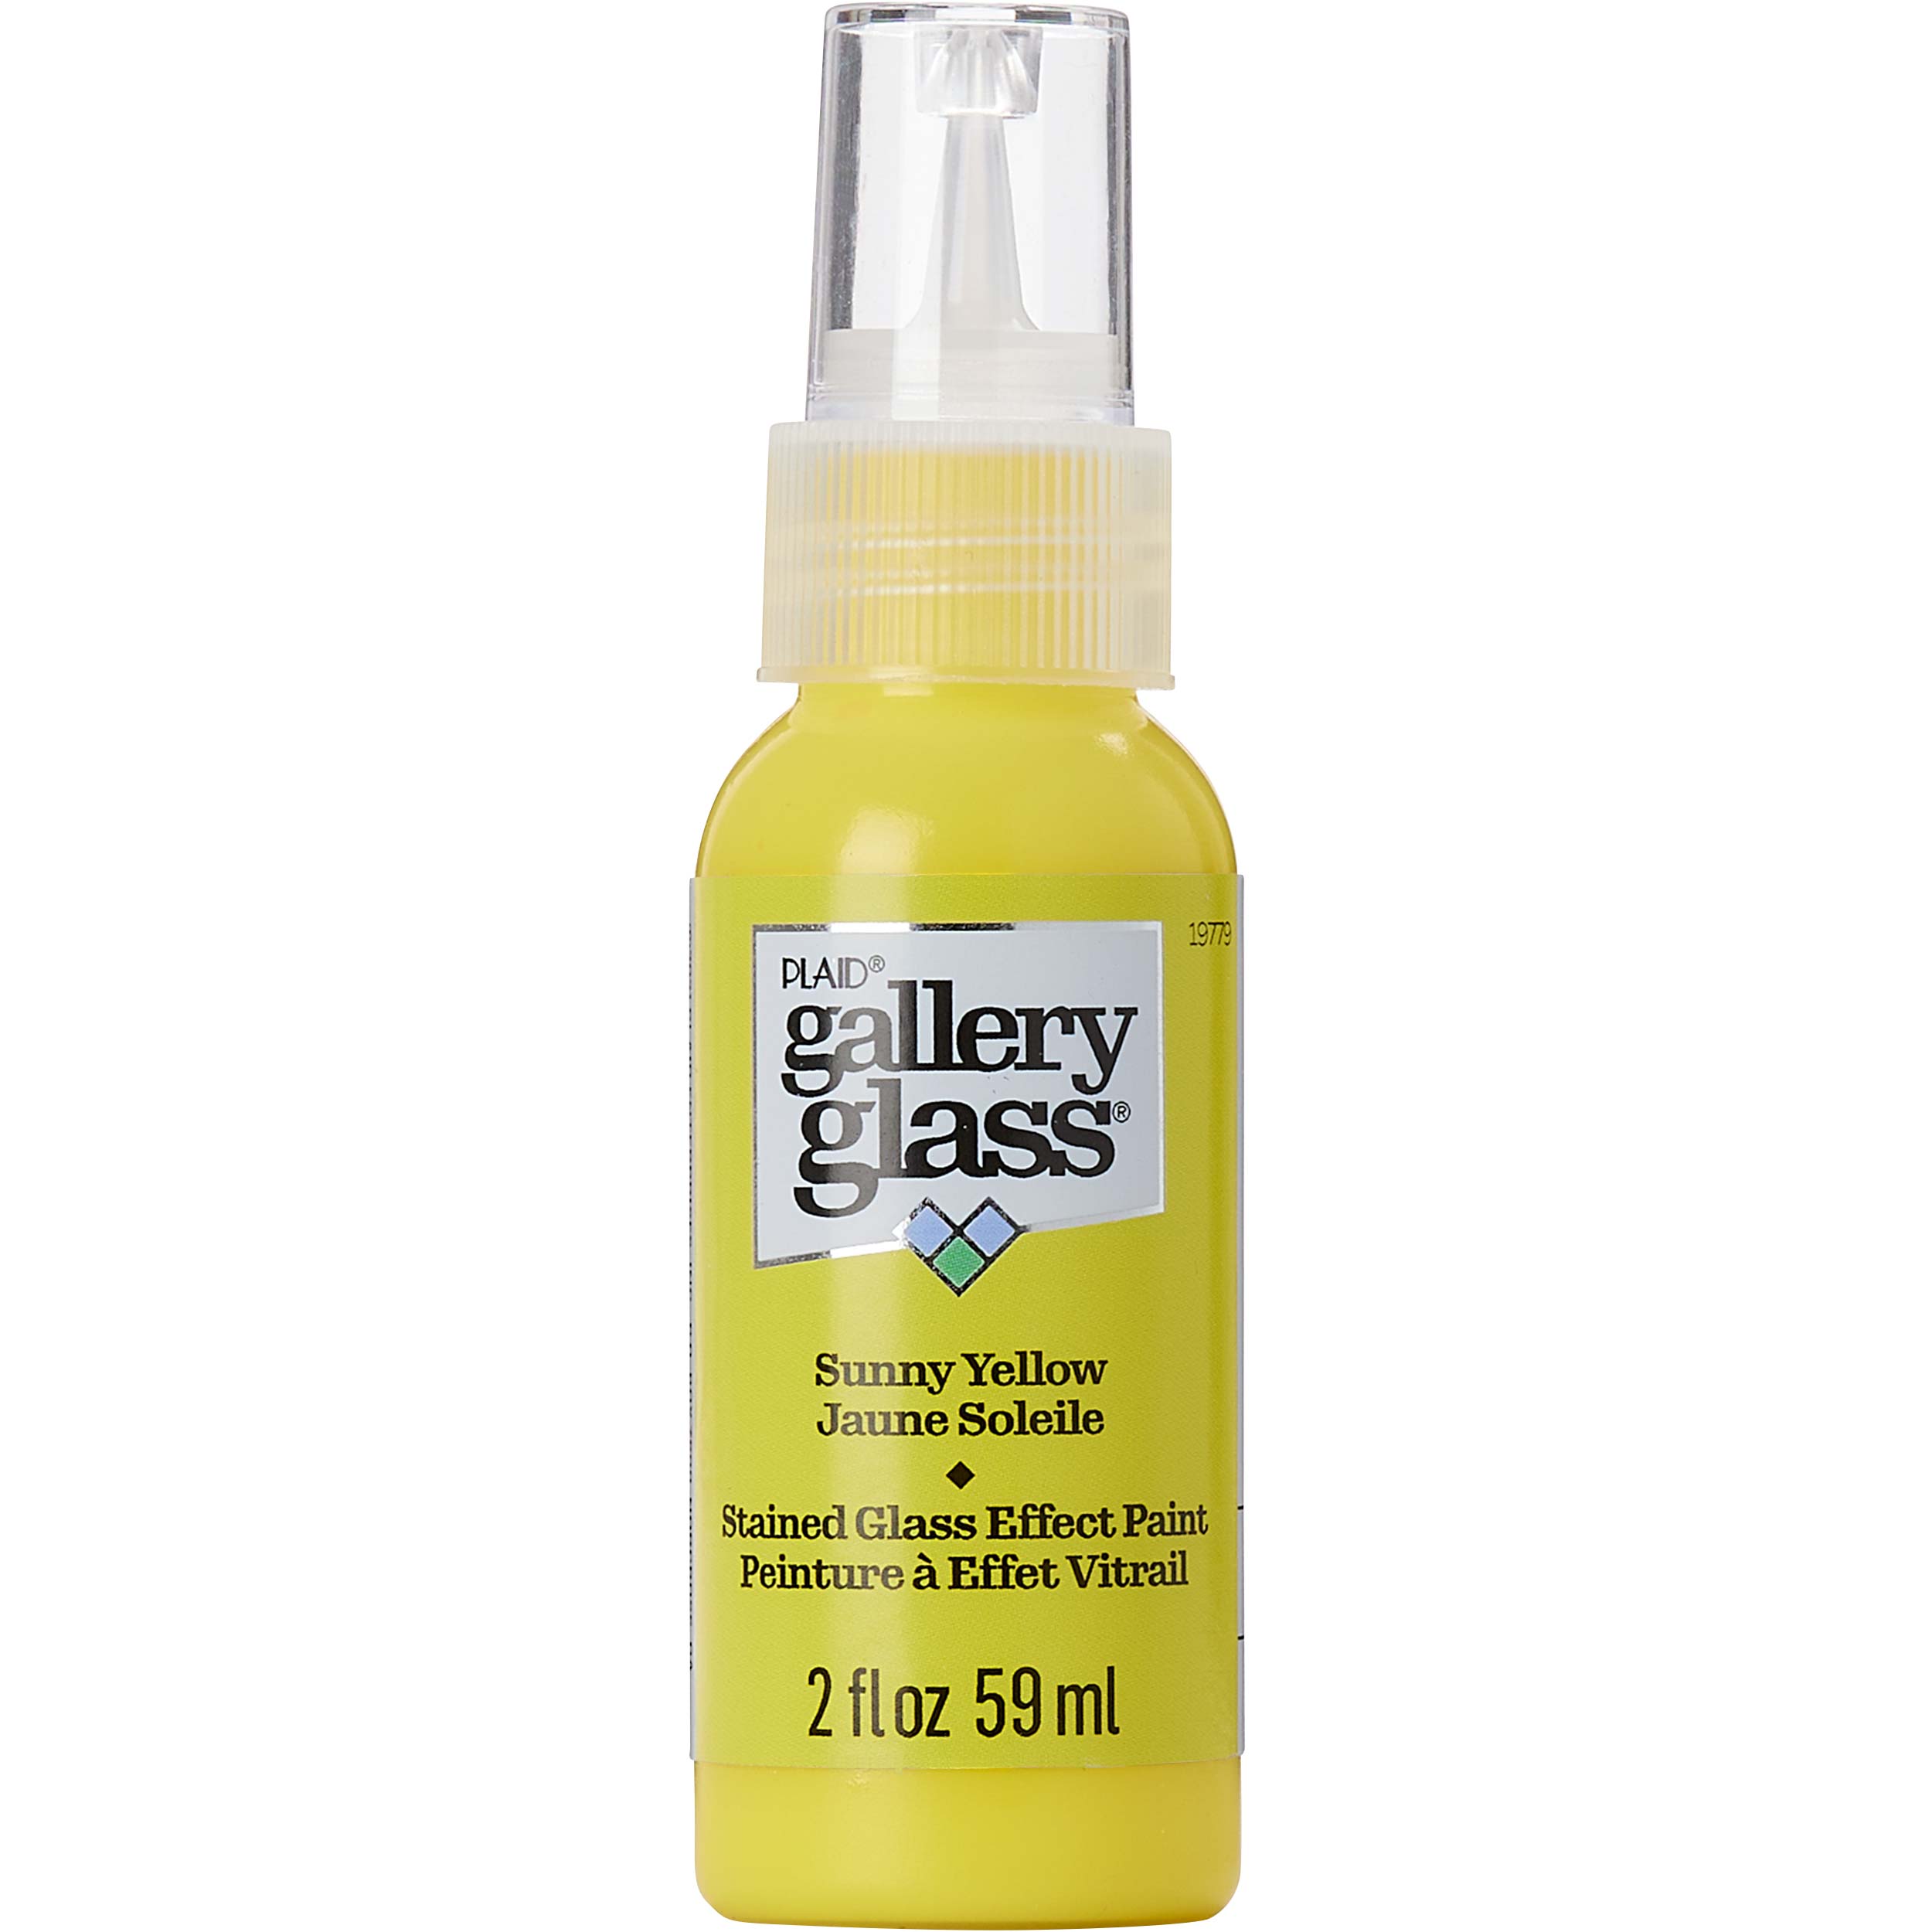 Gallery Glass ® Stained Glass Effect Paint - Sunny Yellow, 2 oz. - 19779